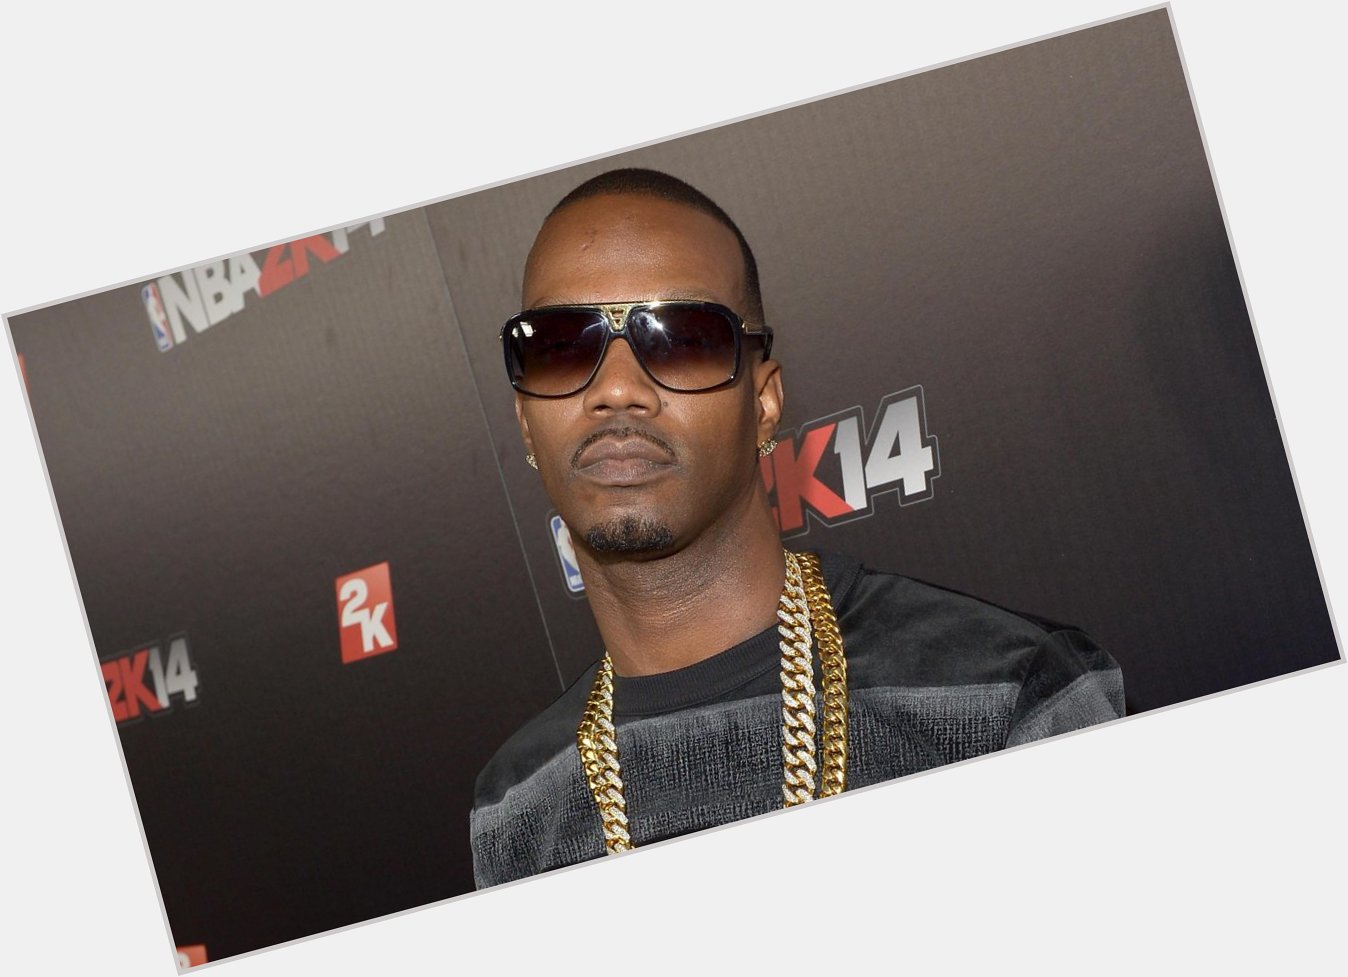 Happy Birthday to Juicy J, who turns 40 today! 